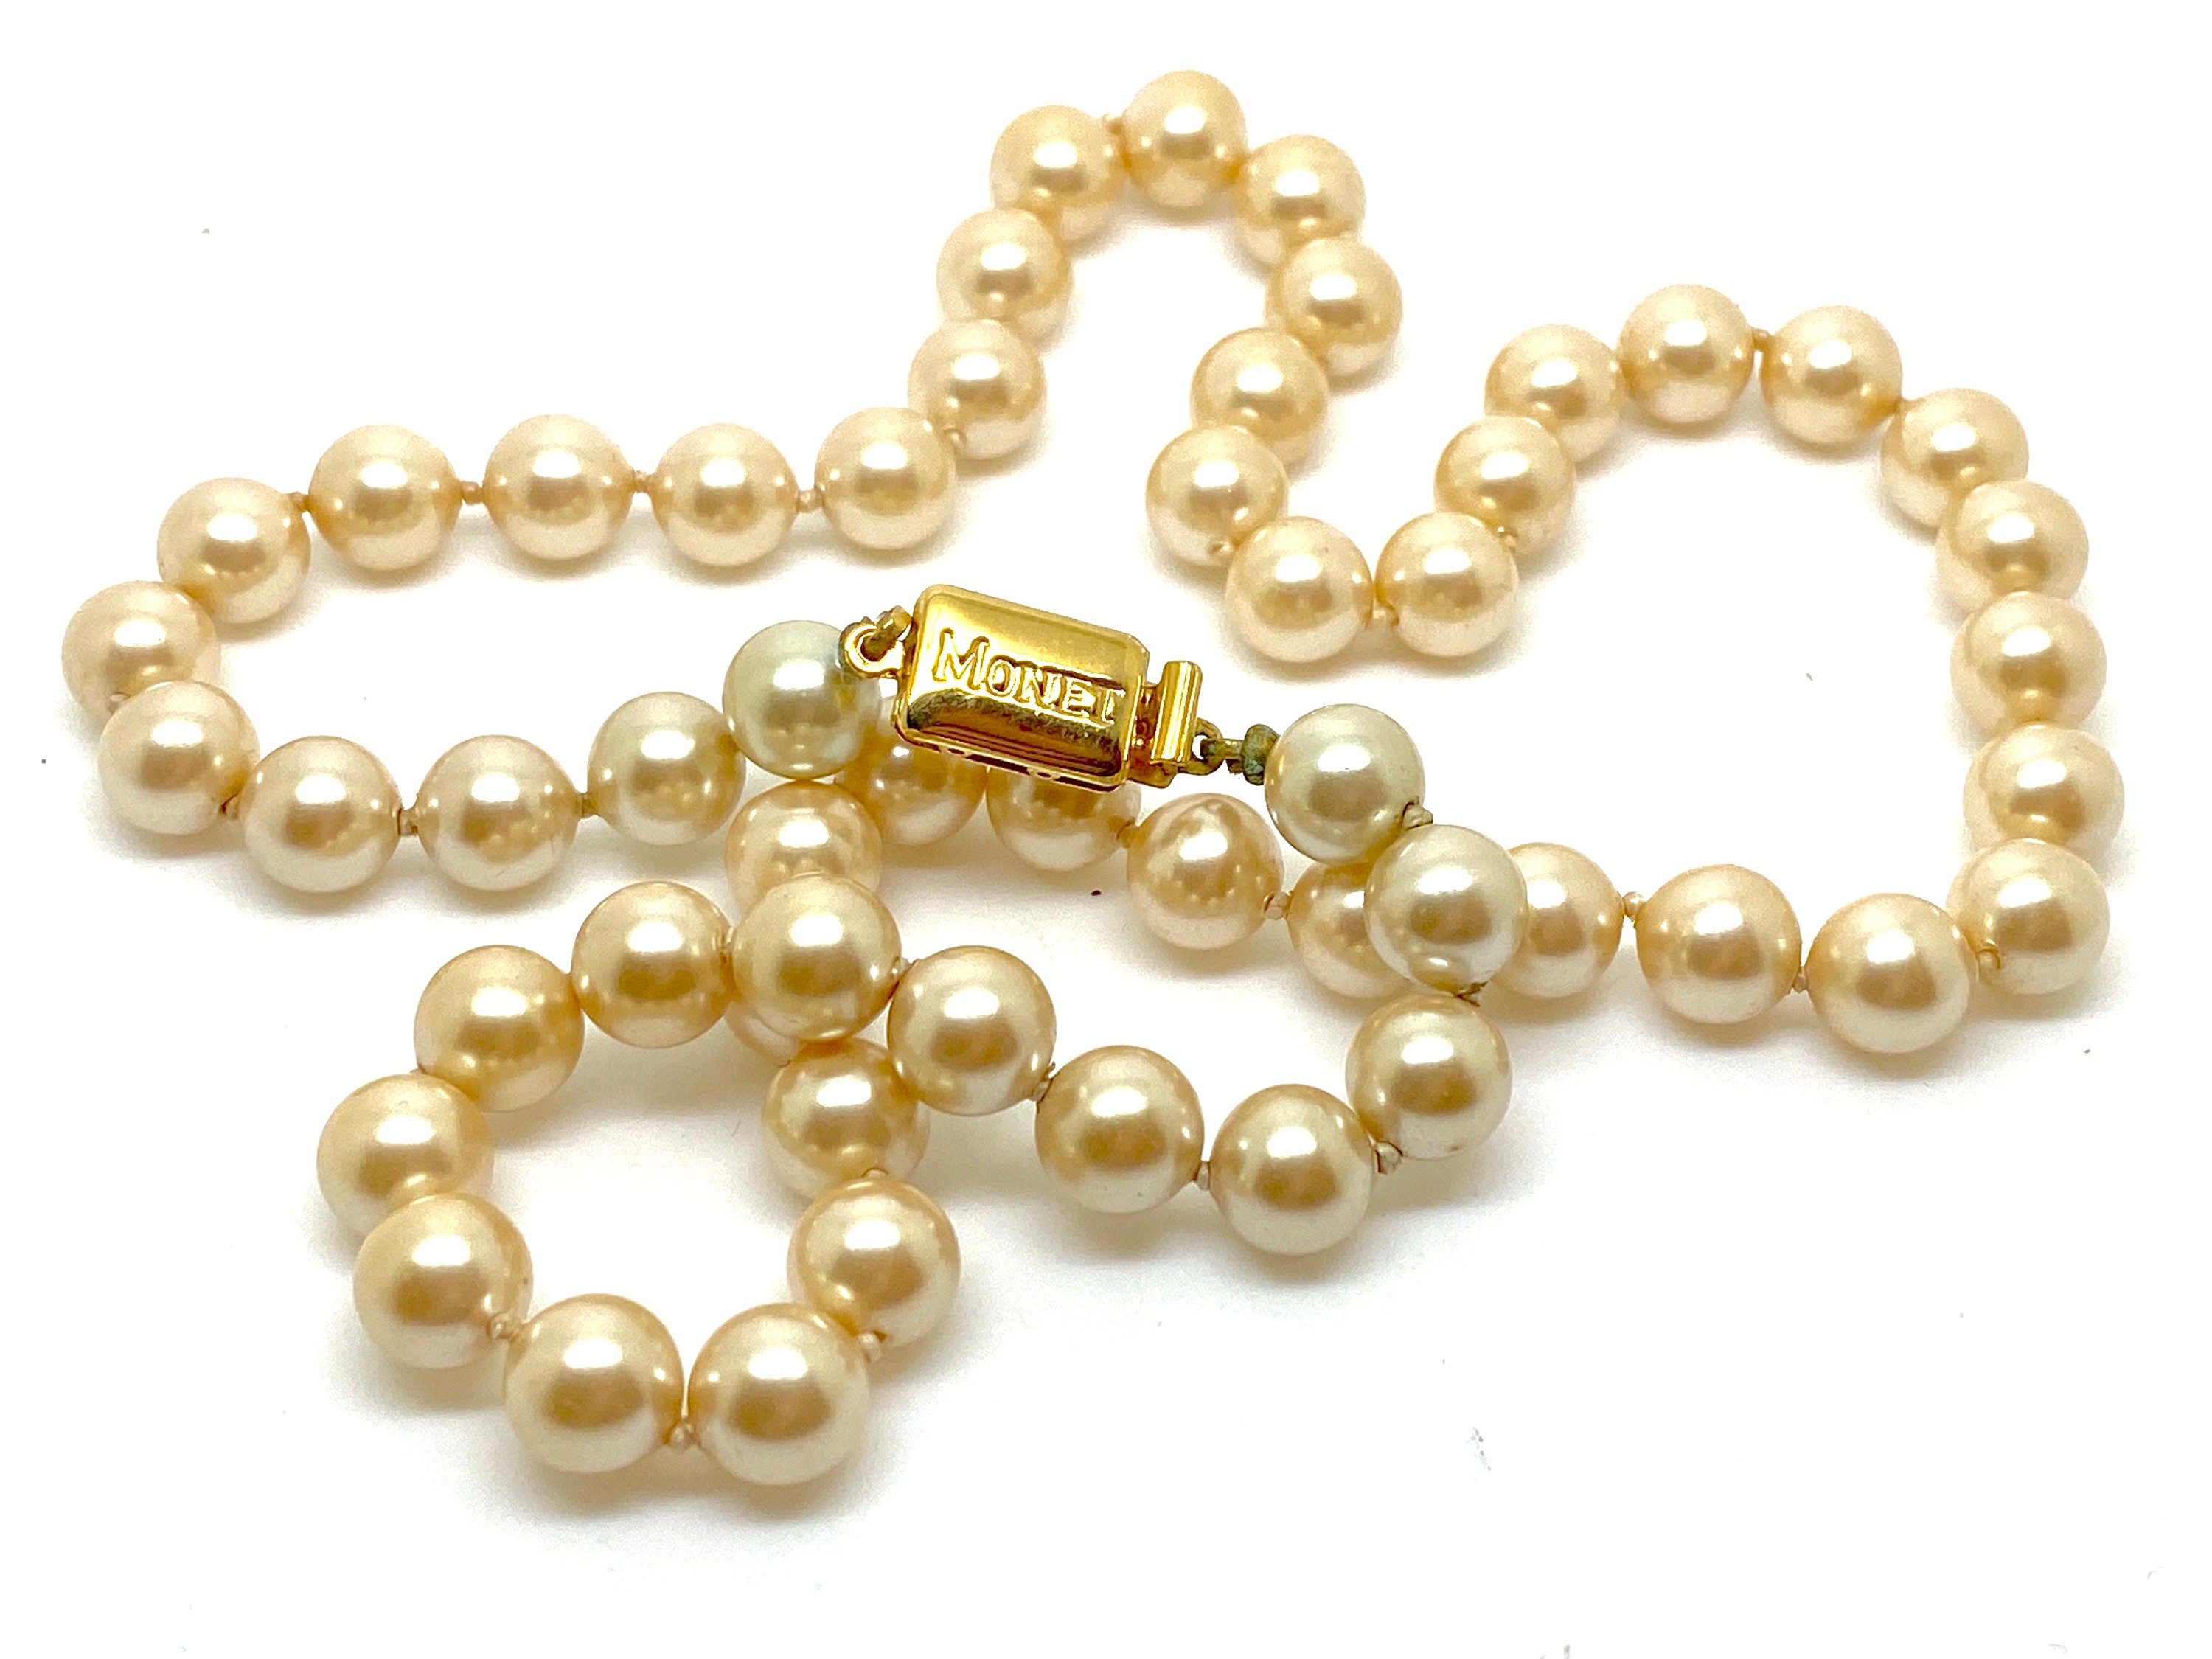 MONET Opera Length Simulated Pearls Necklace 30.0 Inch - Ruby Lane